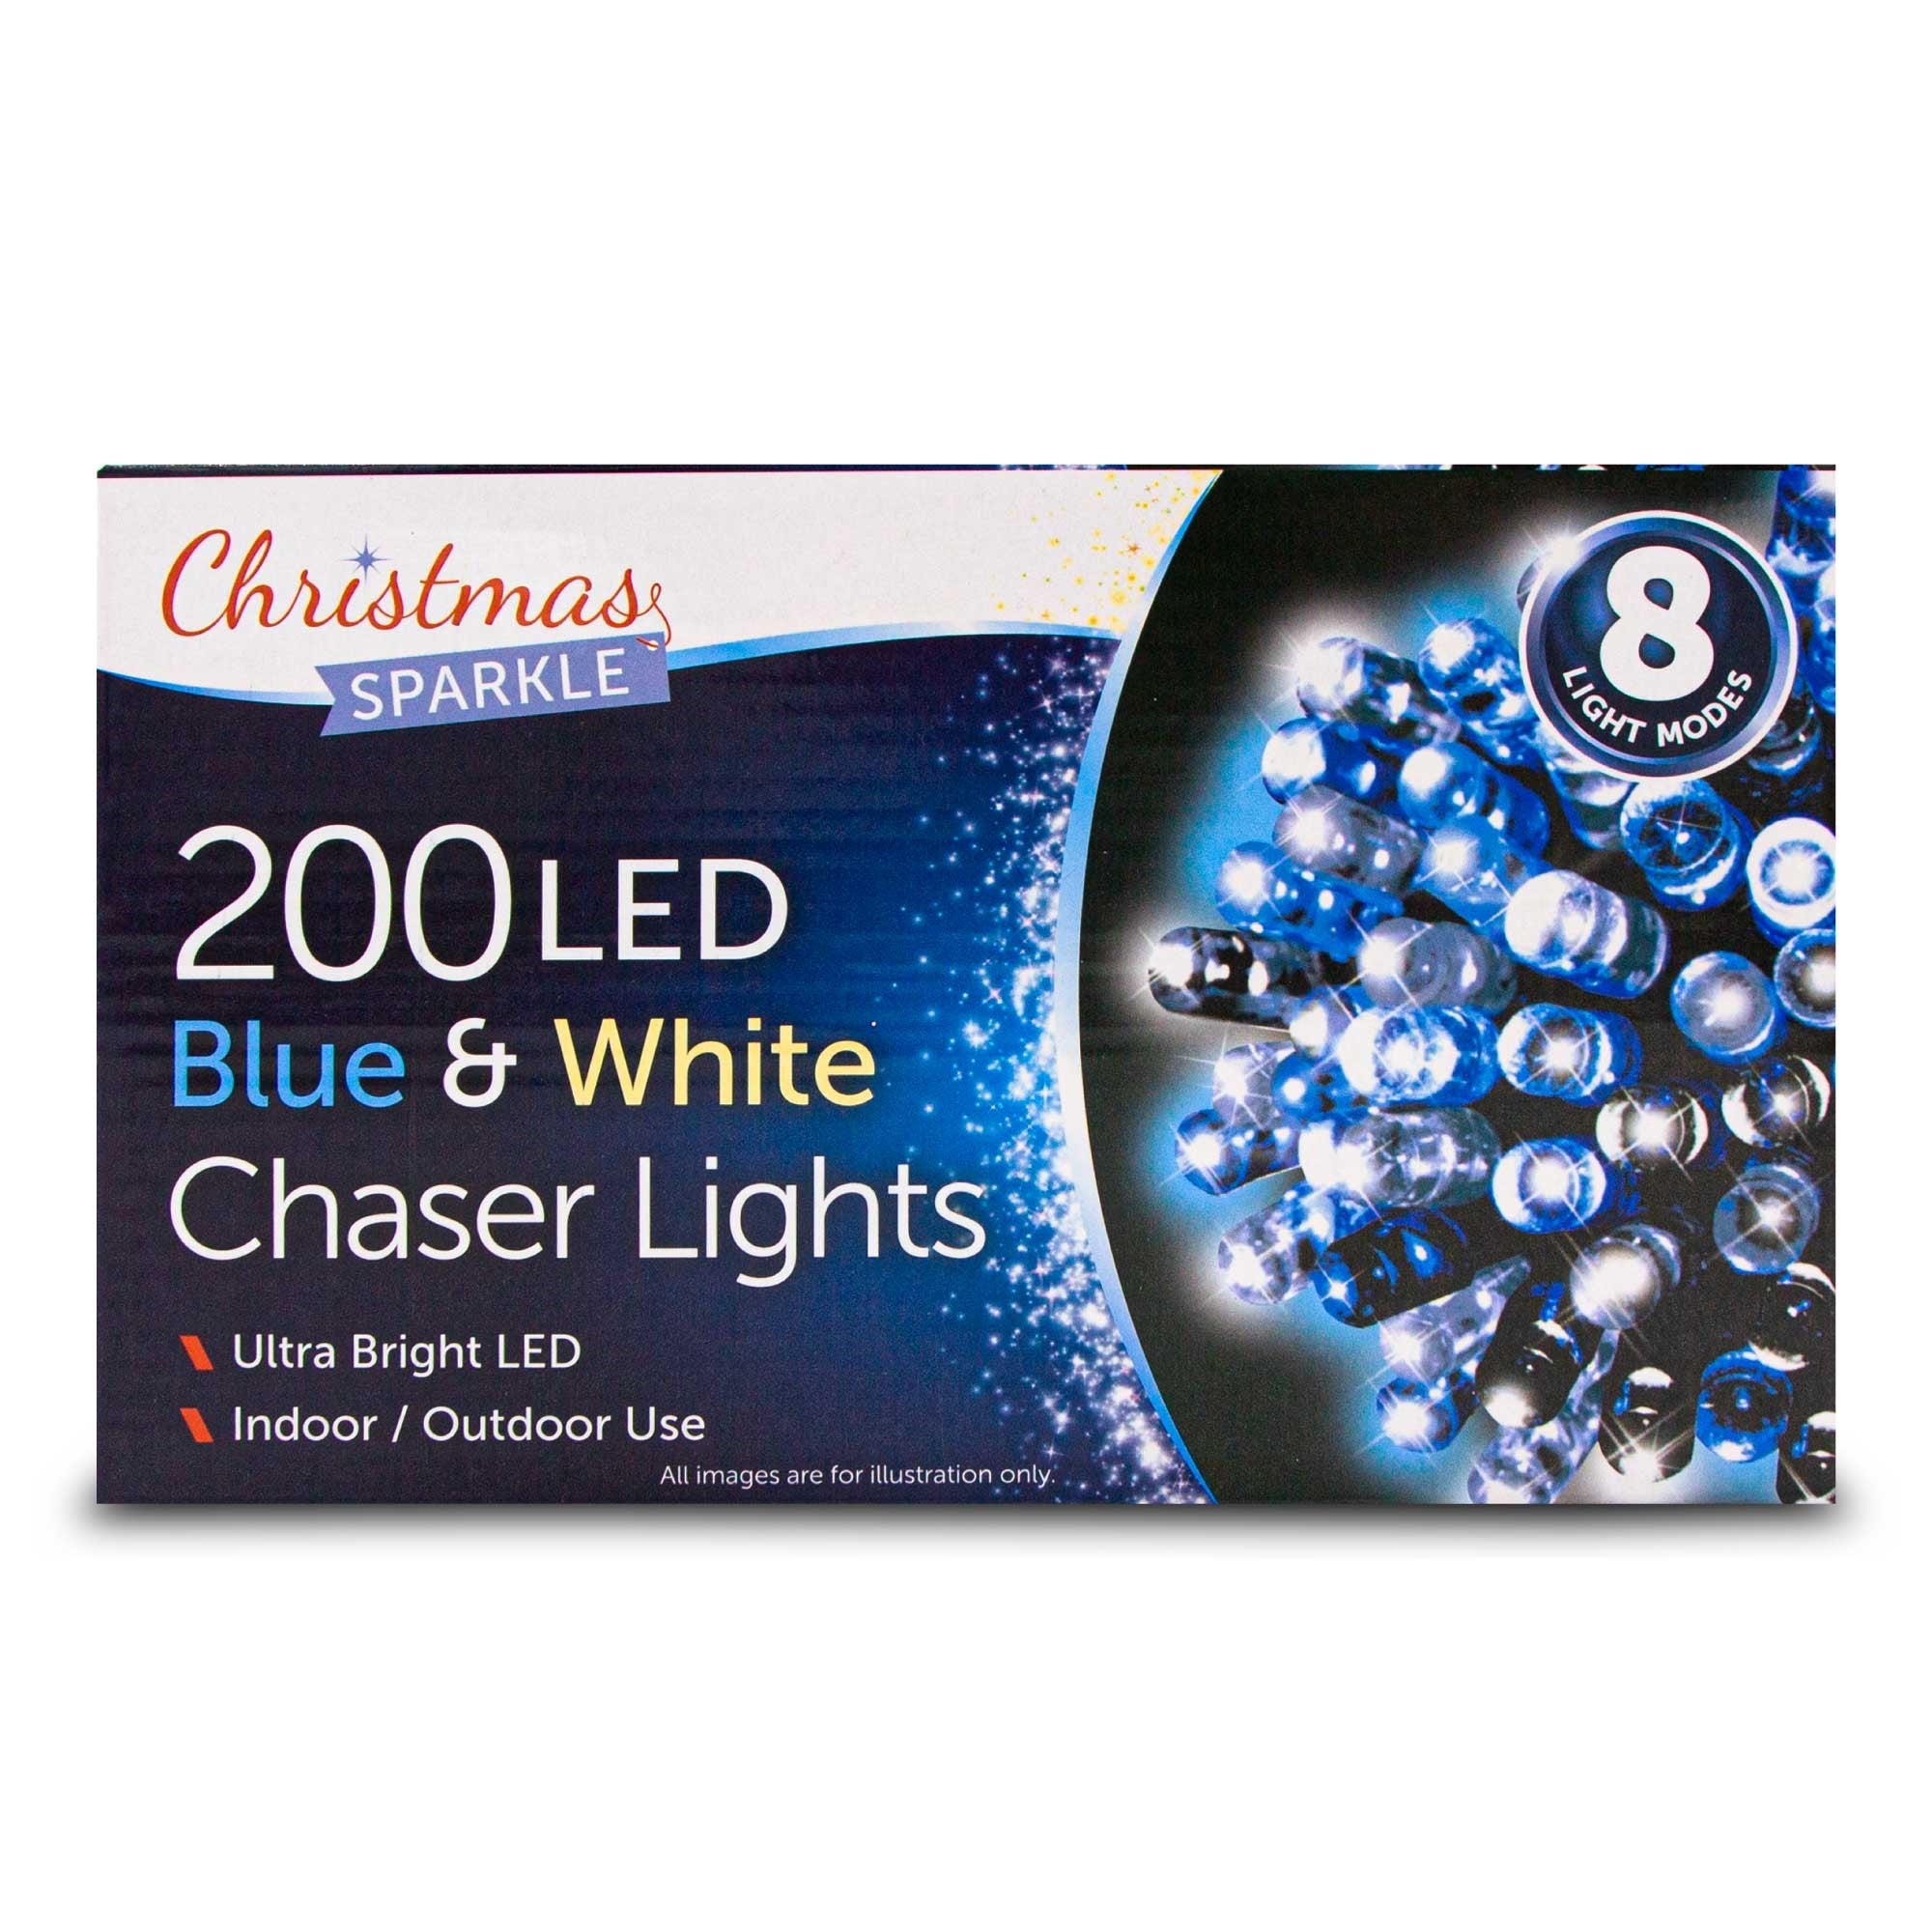 Christmas Sparkle Indoor and Outdoor Chaser Lights x 200 Blue and White LEDs - Mains Operated  | TJ Hughes White/Blue